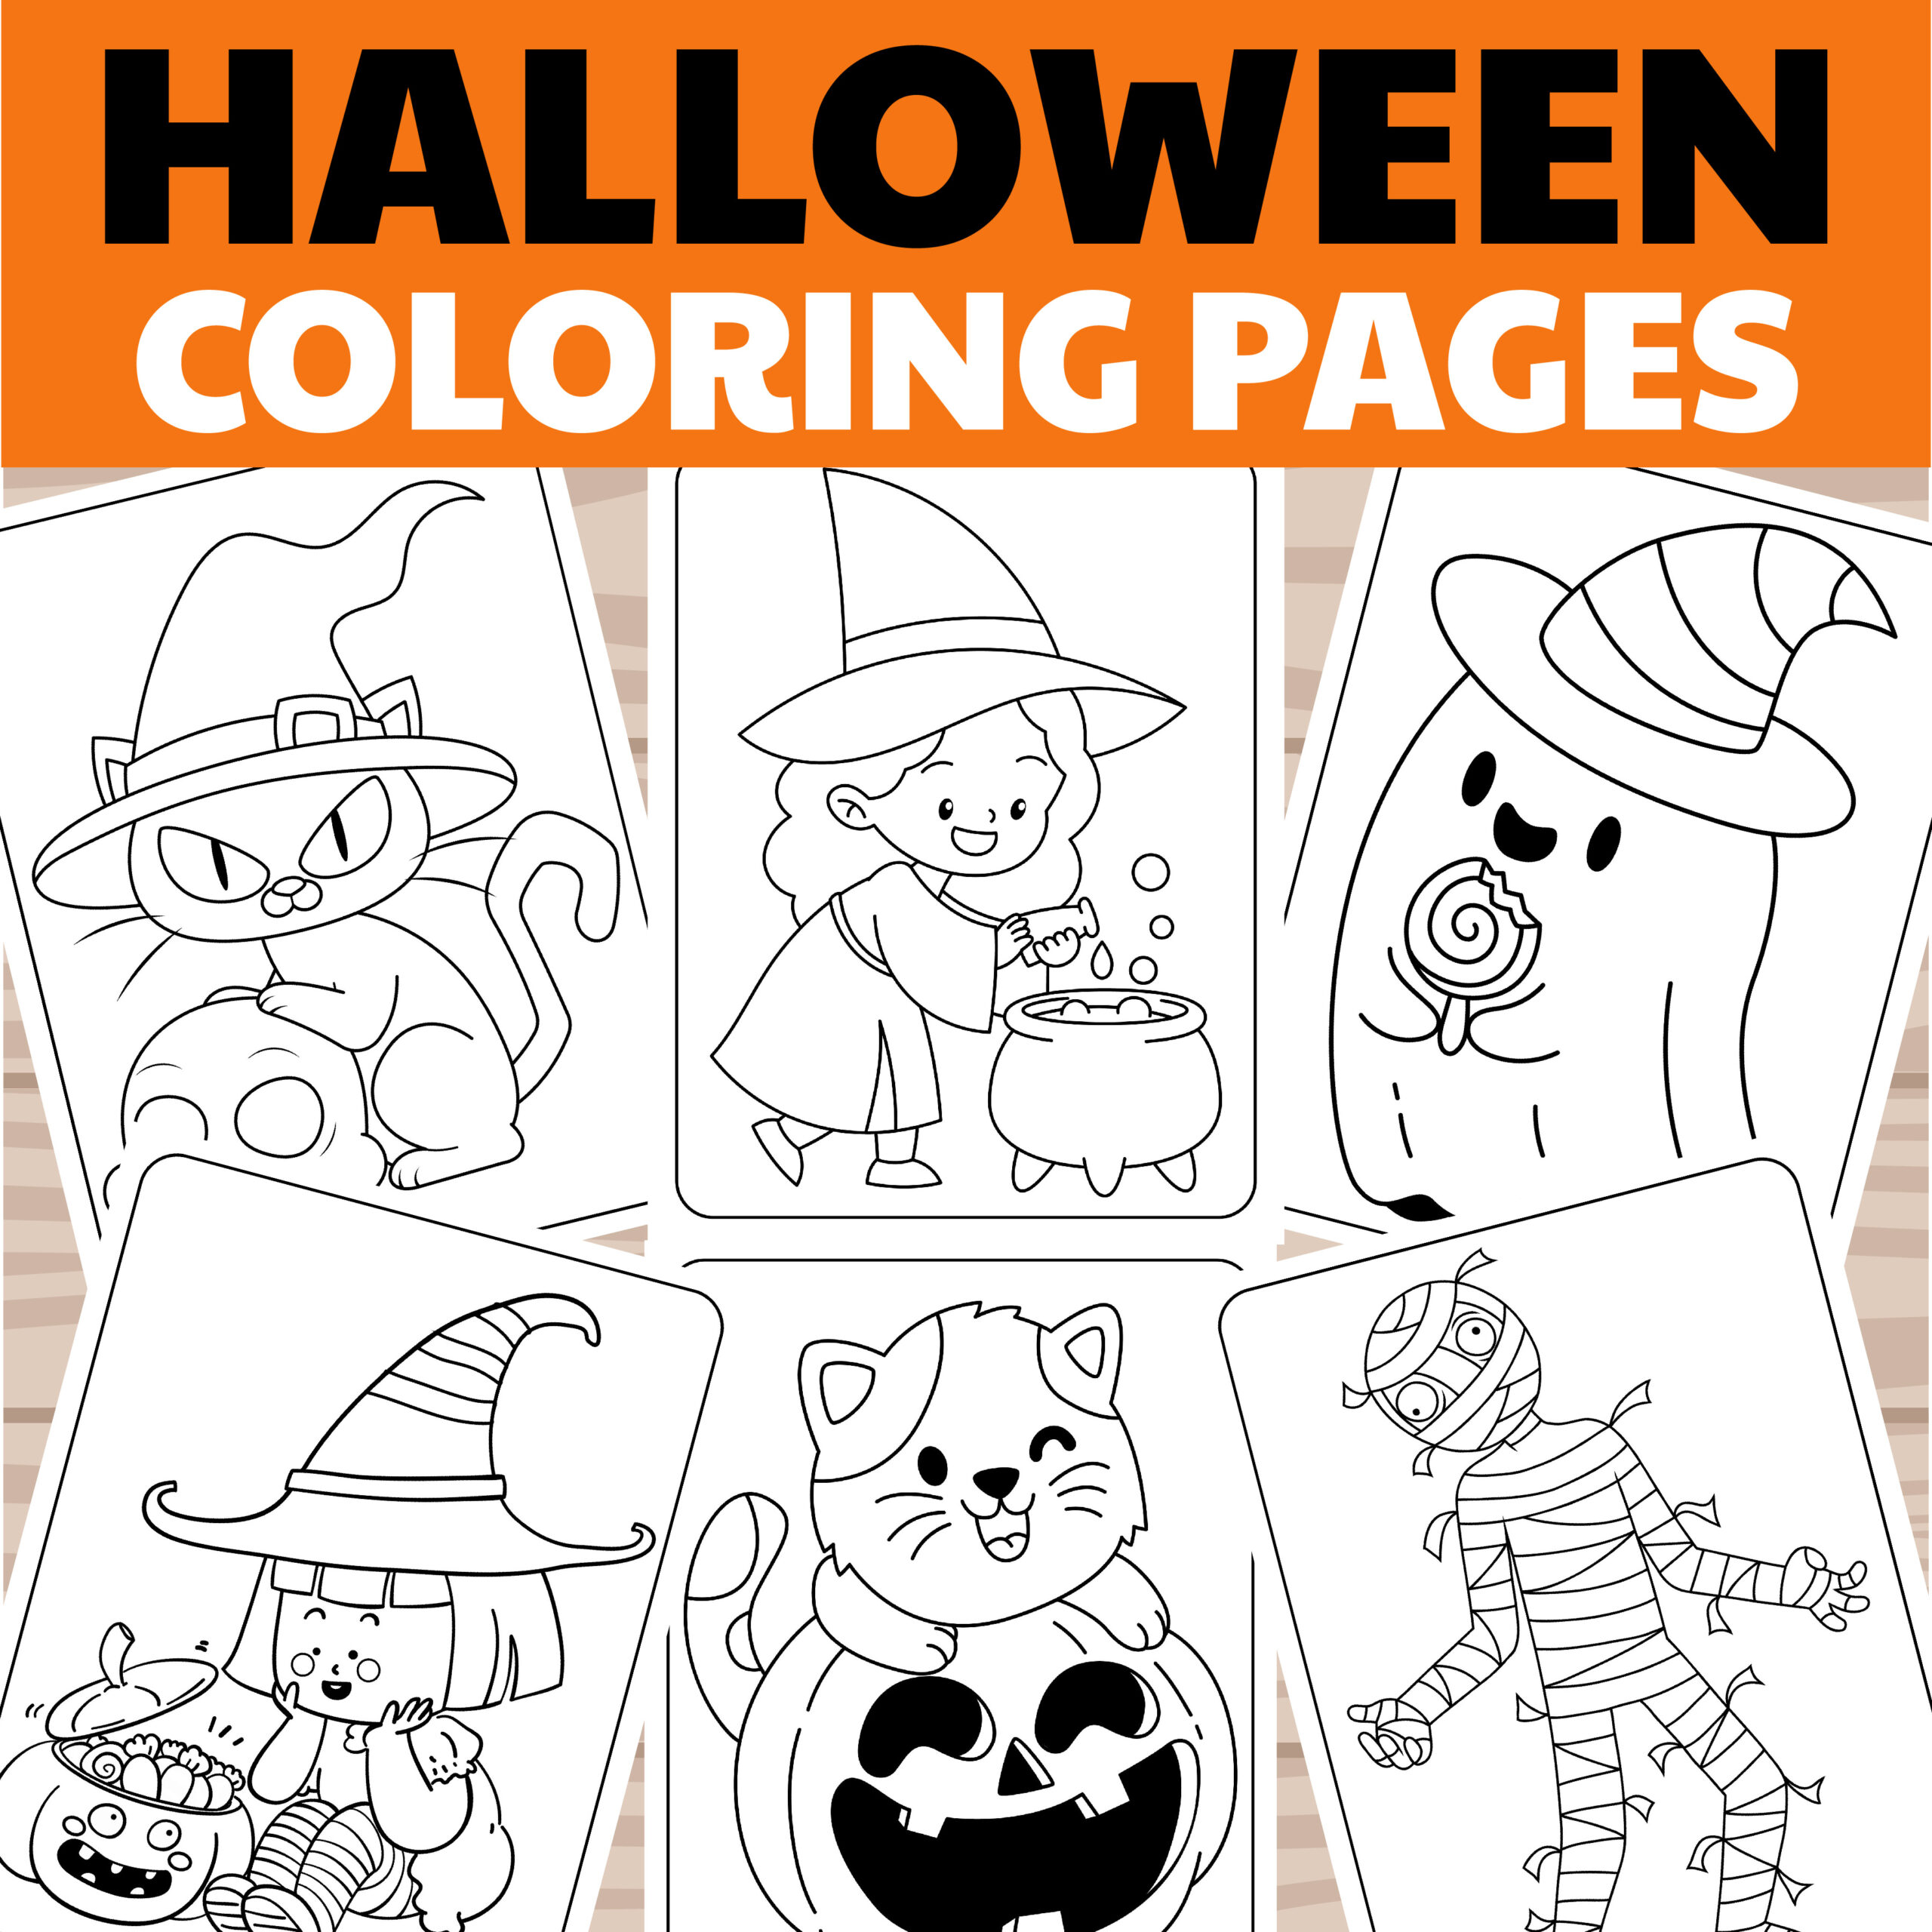 Halloween coloring pages for kids kids halloween coloring sheets halloween coloring sheets made by teachers